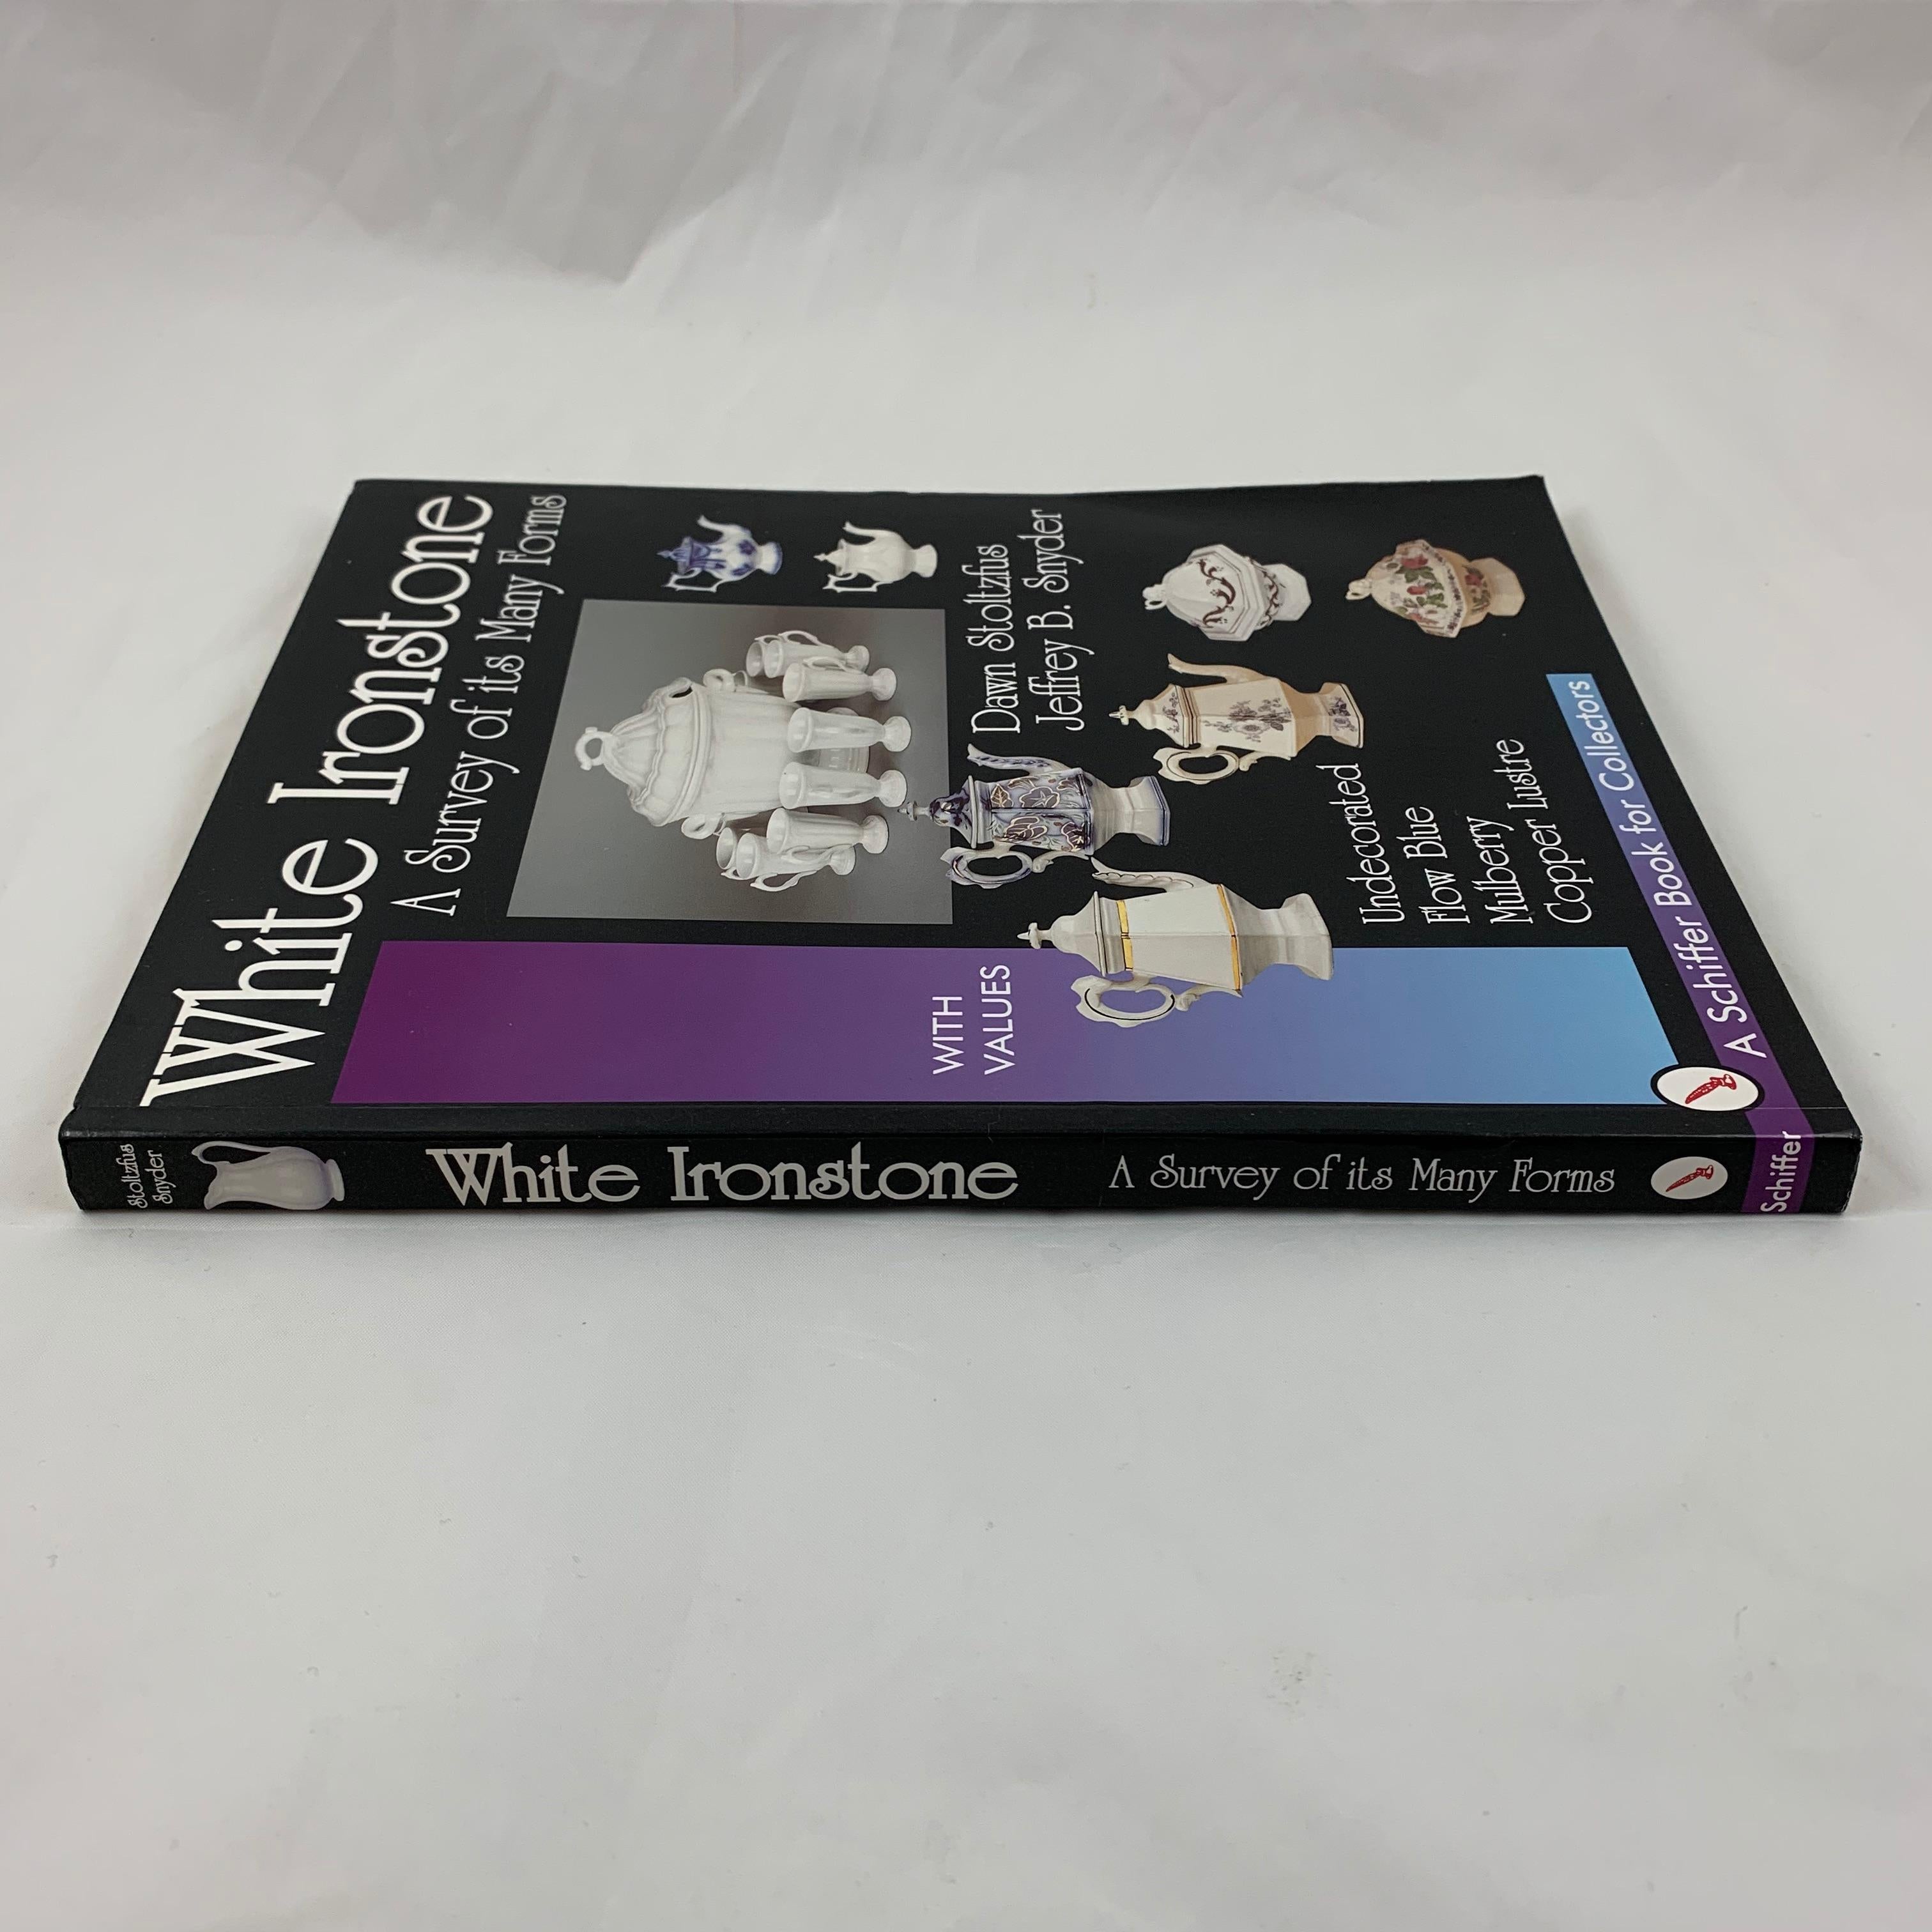 International Style White Ironstone Ceramics Reference Book by Dawn Stoltzfus 1st Edition Paperback For Sale